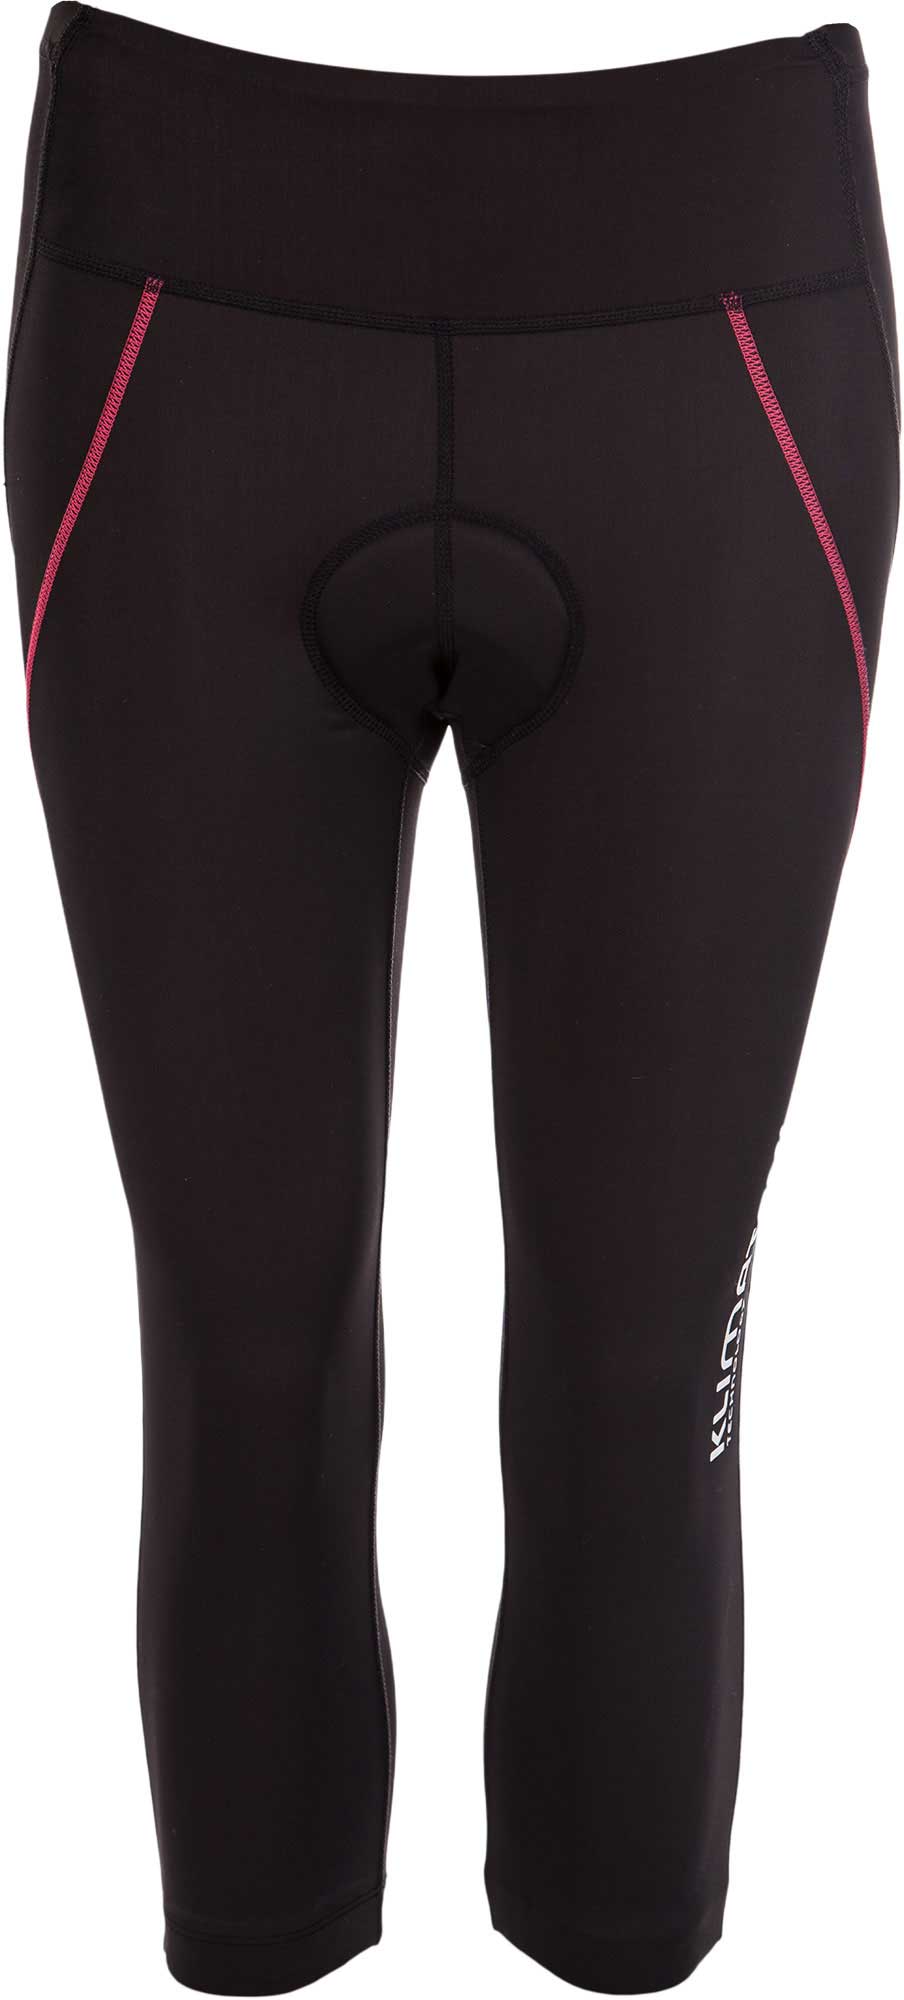 Women's 3/4 cycling tights